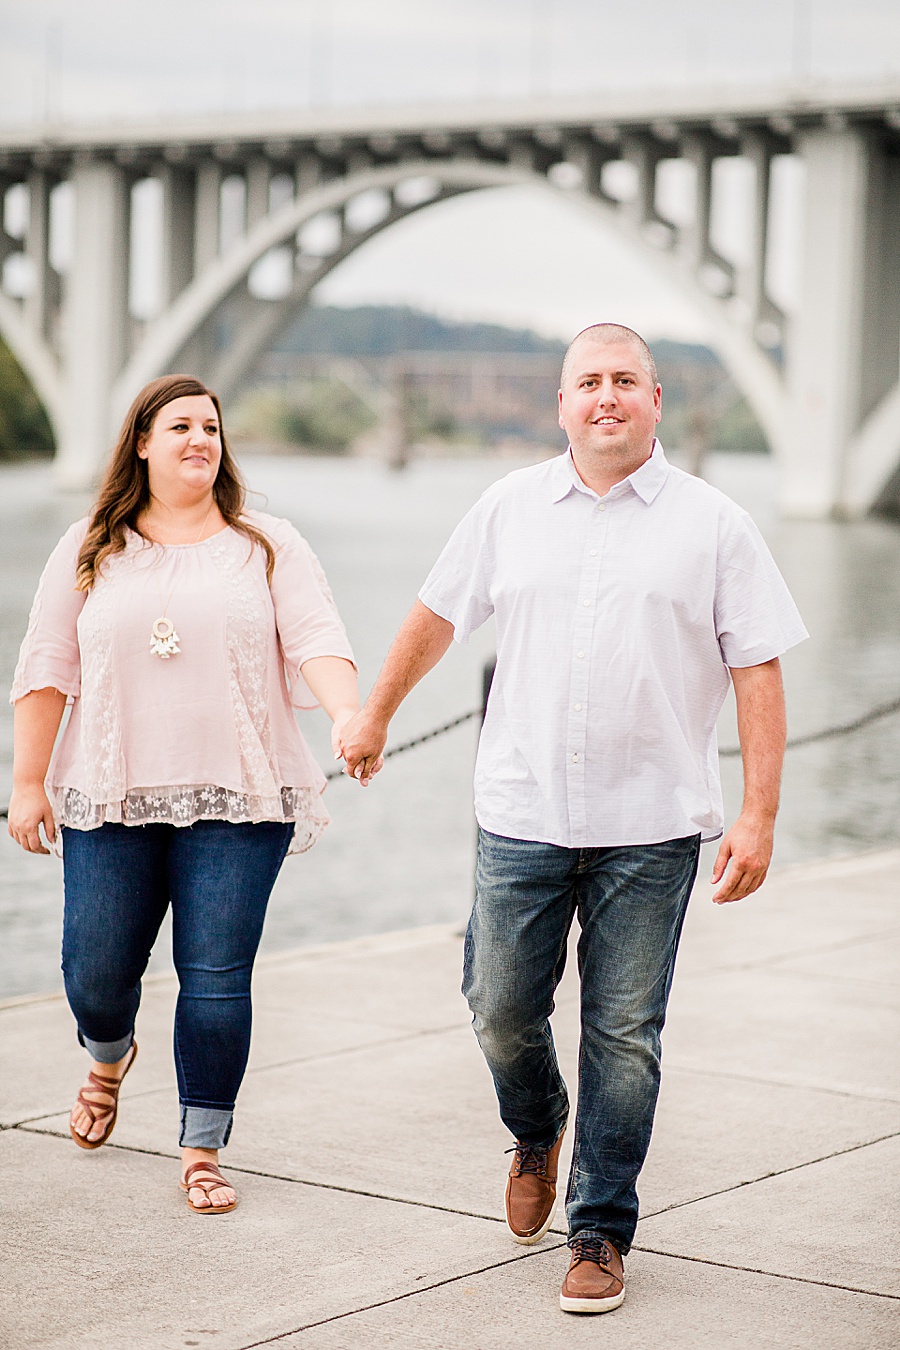 Engagement outfits by Knoxville Wedding Photographer, Amanda May Photos.